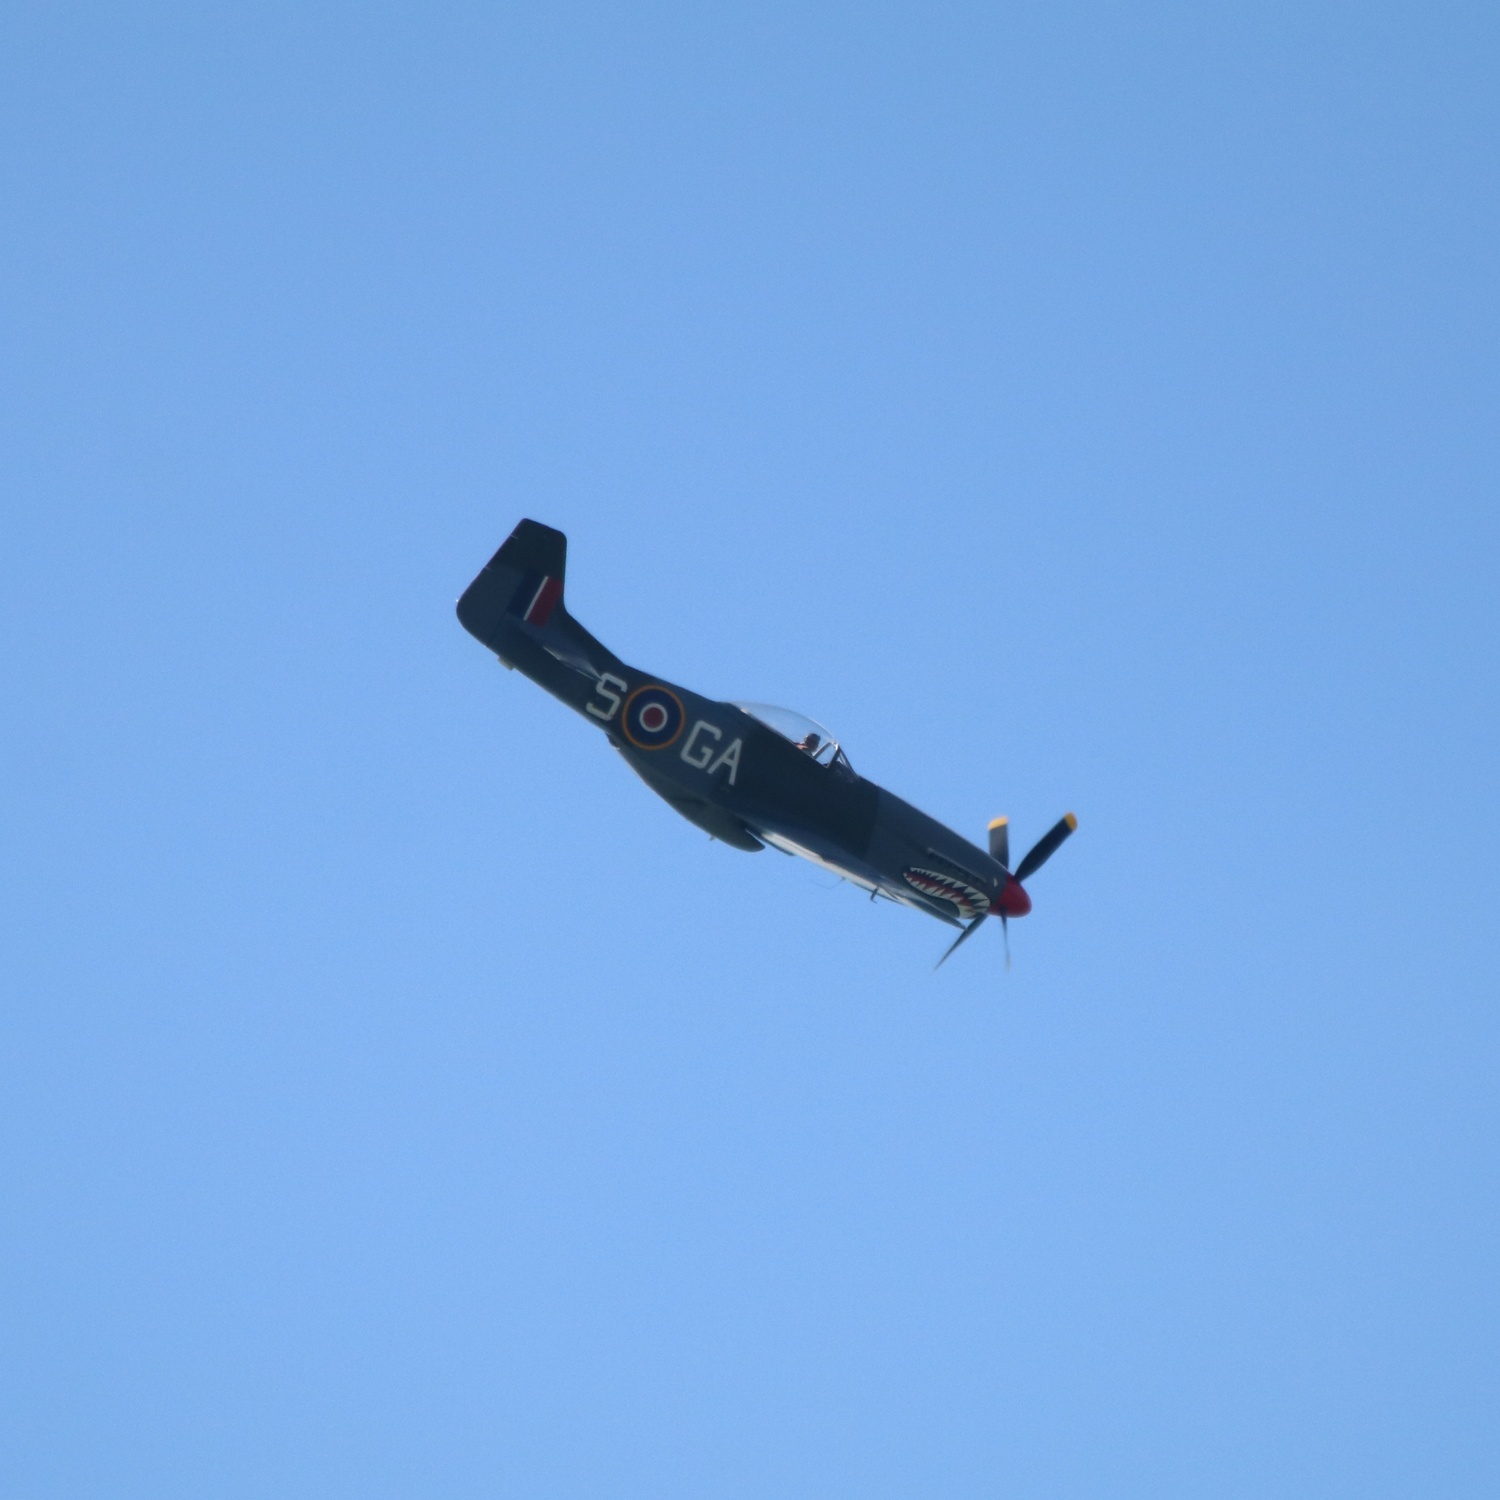 North American P-51 Mustang flying down and right against clear blue sky